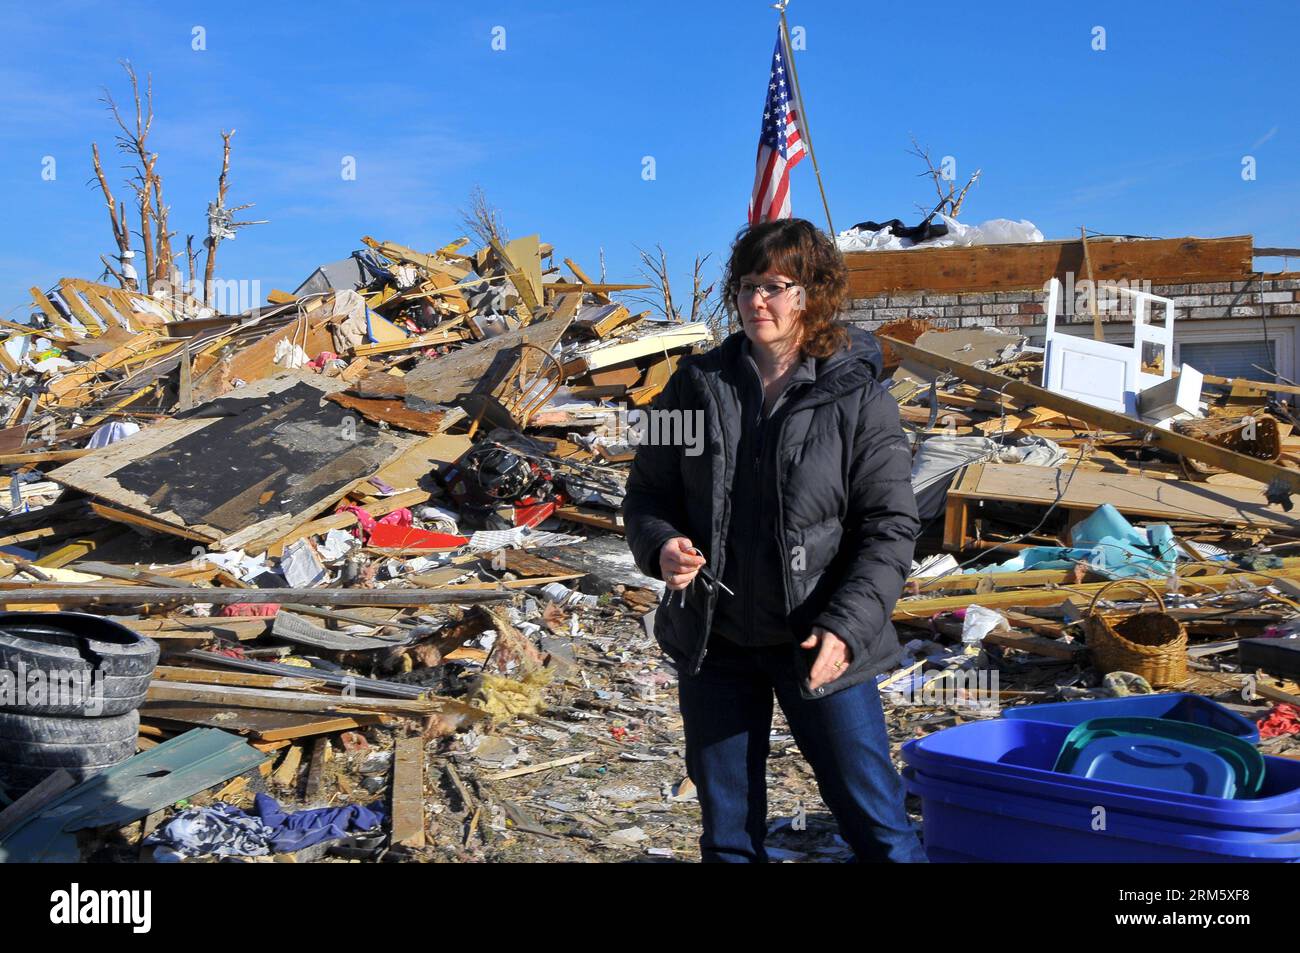 Bildnummer: 60732976  Datum: 19.11.2013  Copyright: imago/Xinhua ILLINOIS, Nov. 19, 2013 (Xinhua) -- A local resident stands in ruins after a tornado attack in the town of Washington in Illinois, the United States, on Nov. 19, 2013. At least 16 were killed during tornado attacks on Sunday, according to the National Weather Service. (Xinhua/Zhang Baoping)(ybg) US-ILLINOIS-TORNADO PUBLICATIONxNOTxINxCHN Gesellschaft USA Naturkatastrophe x0x xsk 2013 quer     60732976 Date 19 11 2013 Copyright Imago XINHUA Illinois Nov 19 2013 XINHUA a Local Resident stands in Ruins After a Tornado Attack in The Stock Photo